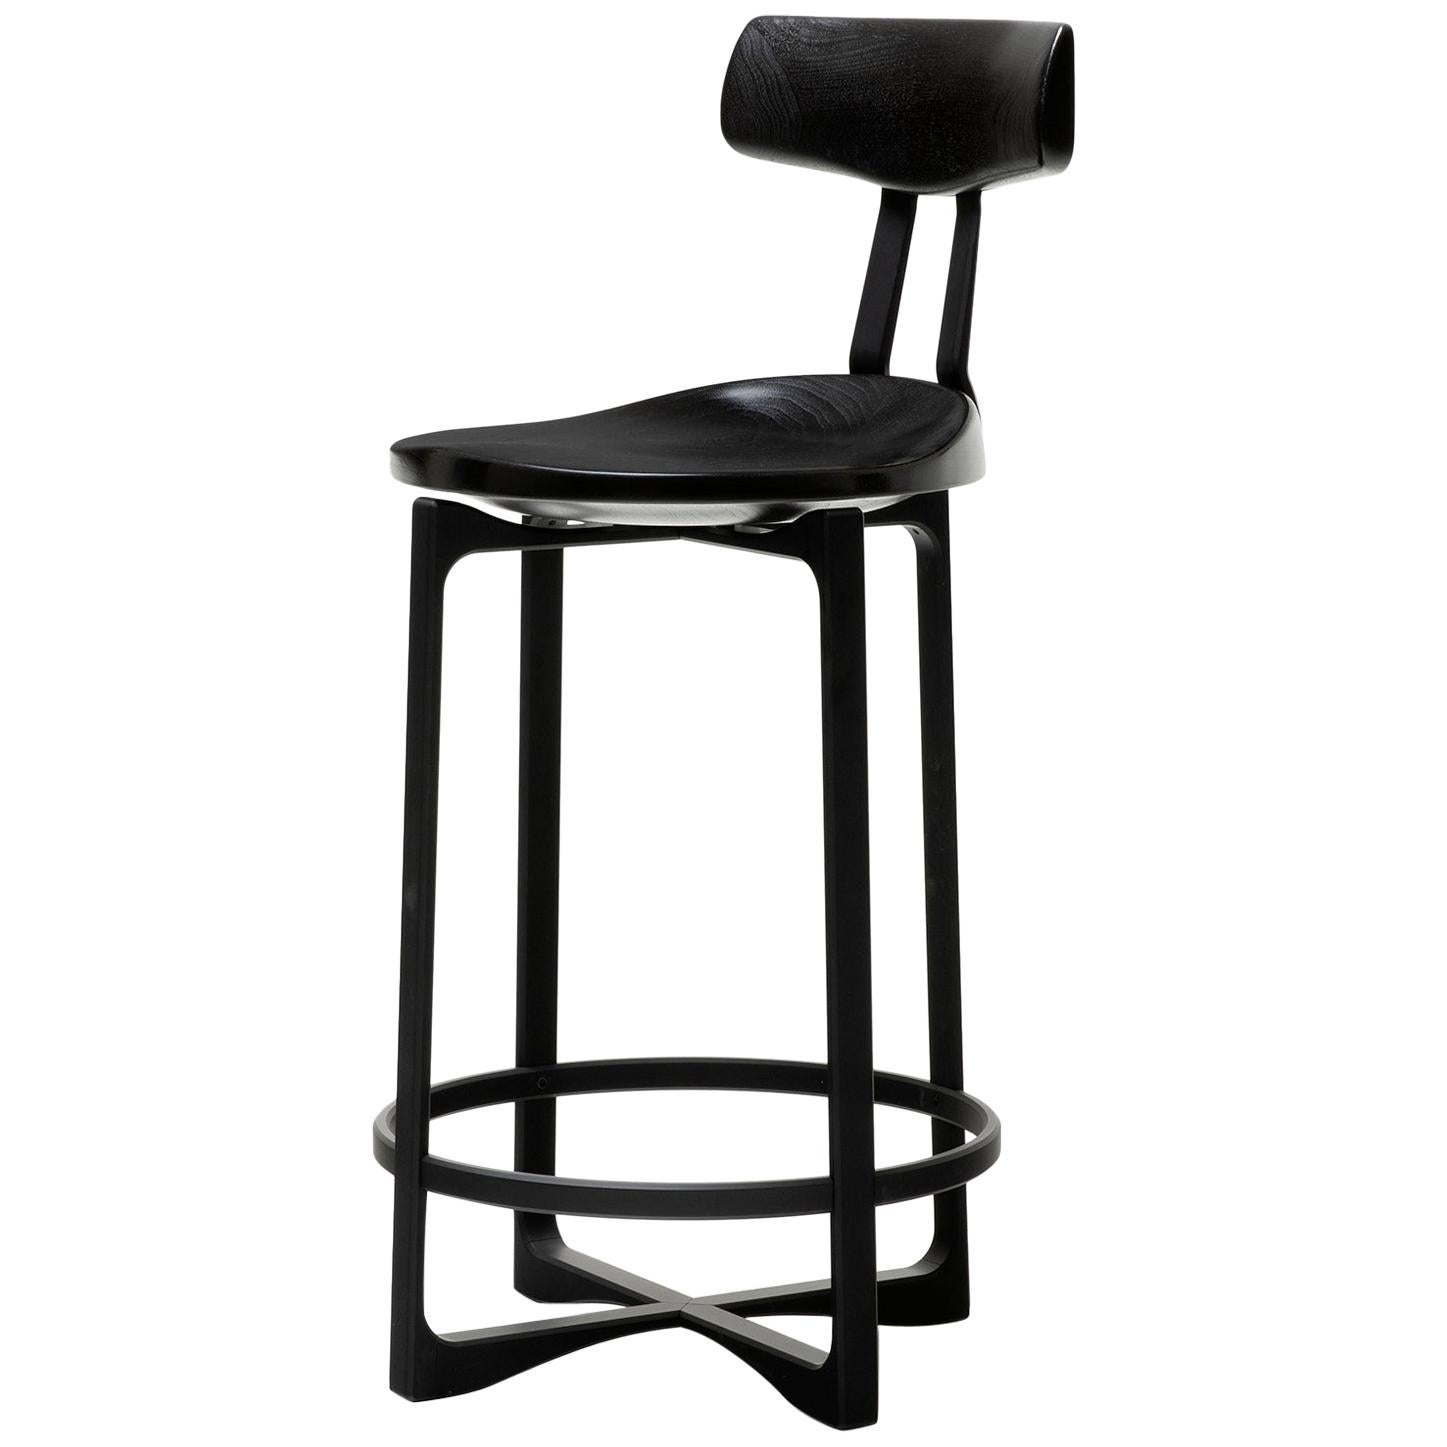 HOLLY HUNT Pepper Counter Stool with Backrest in Black Walnut and Aluminum Frame